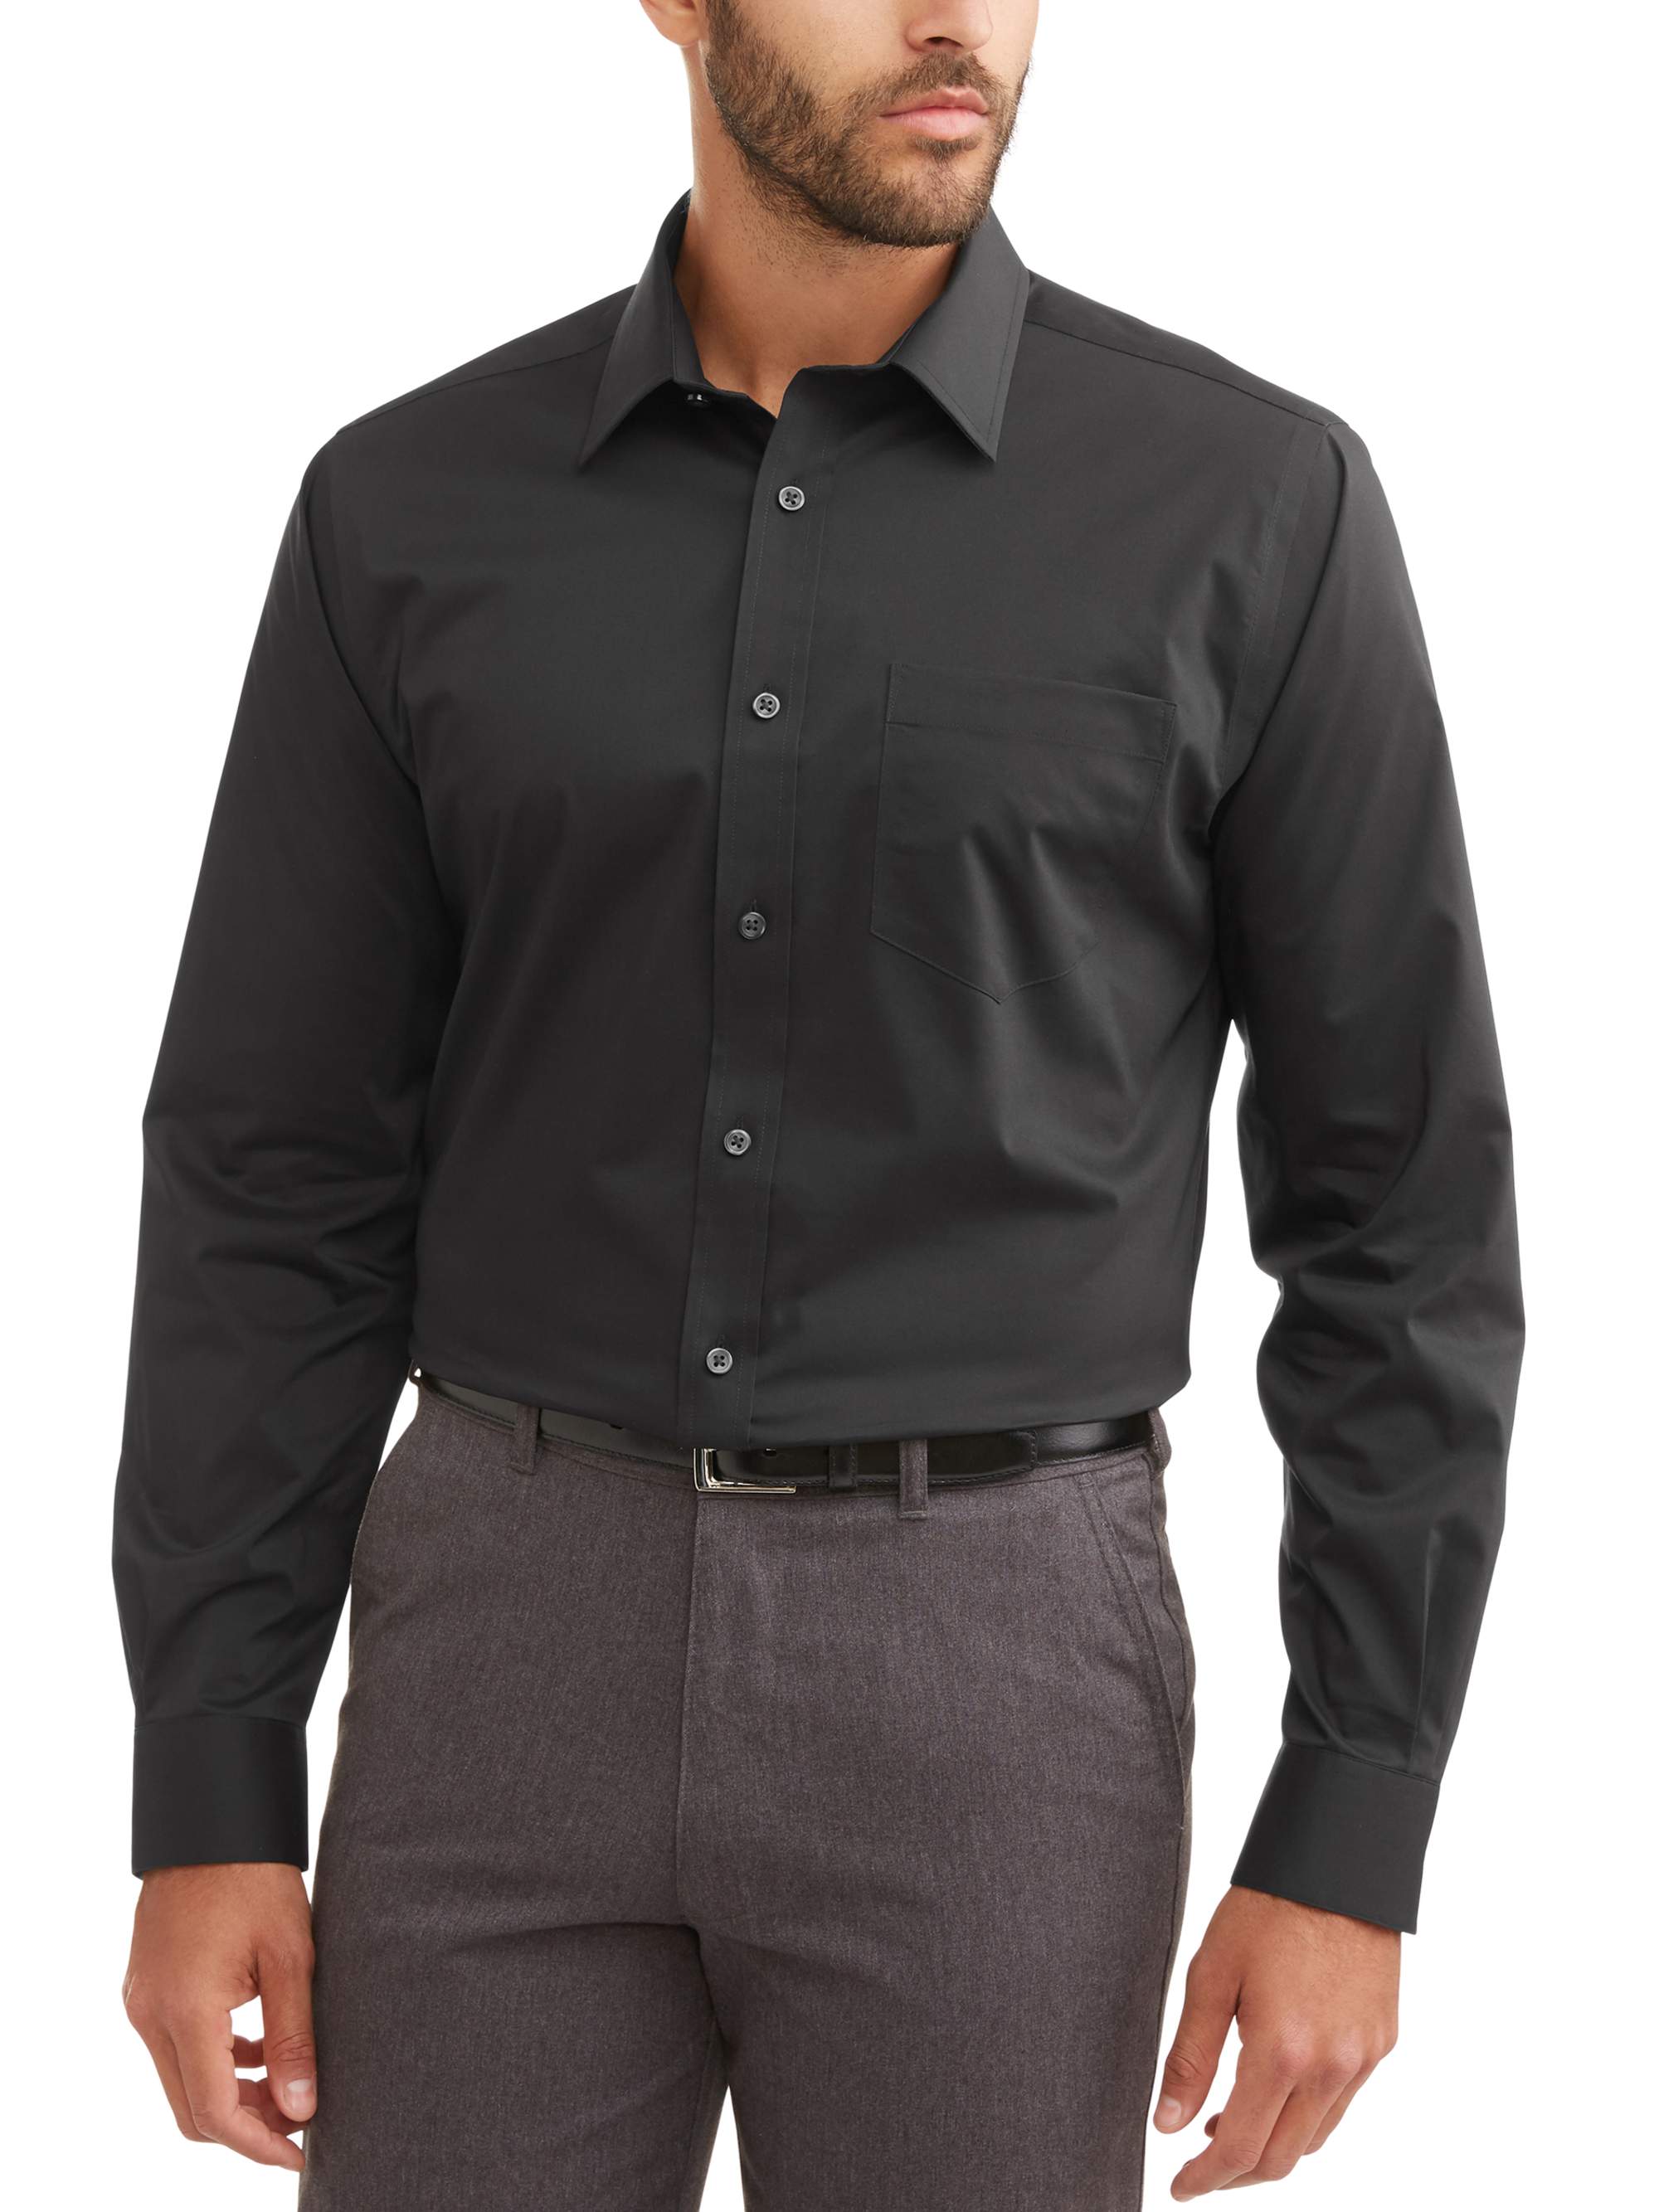 George Men's Long Sleeve Performance Slim Fit Dress Shirt, Up to 3XL - image 1 of 5